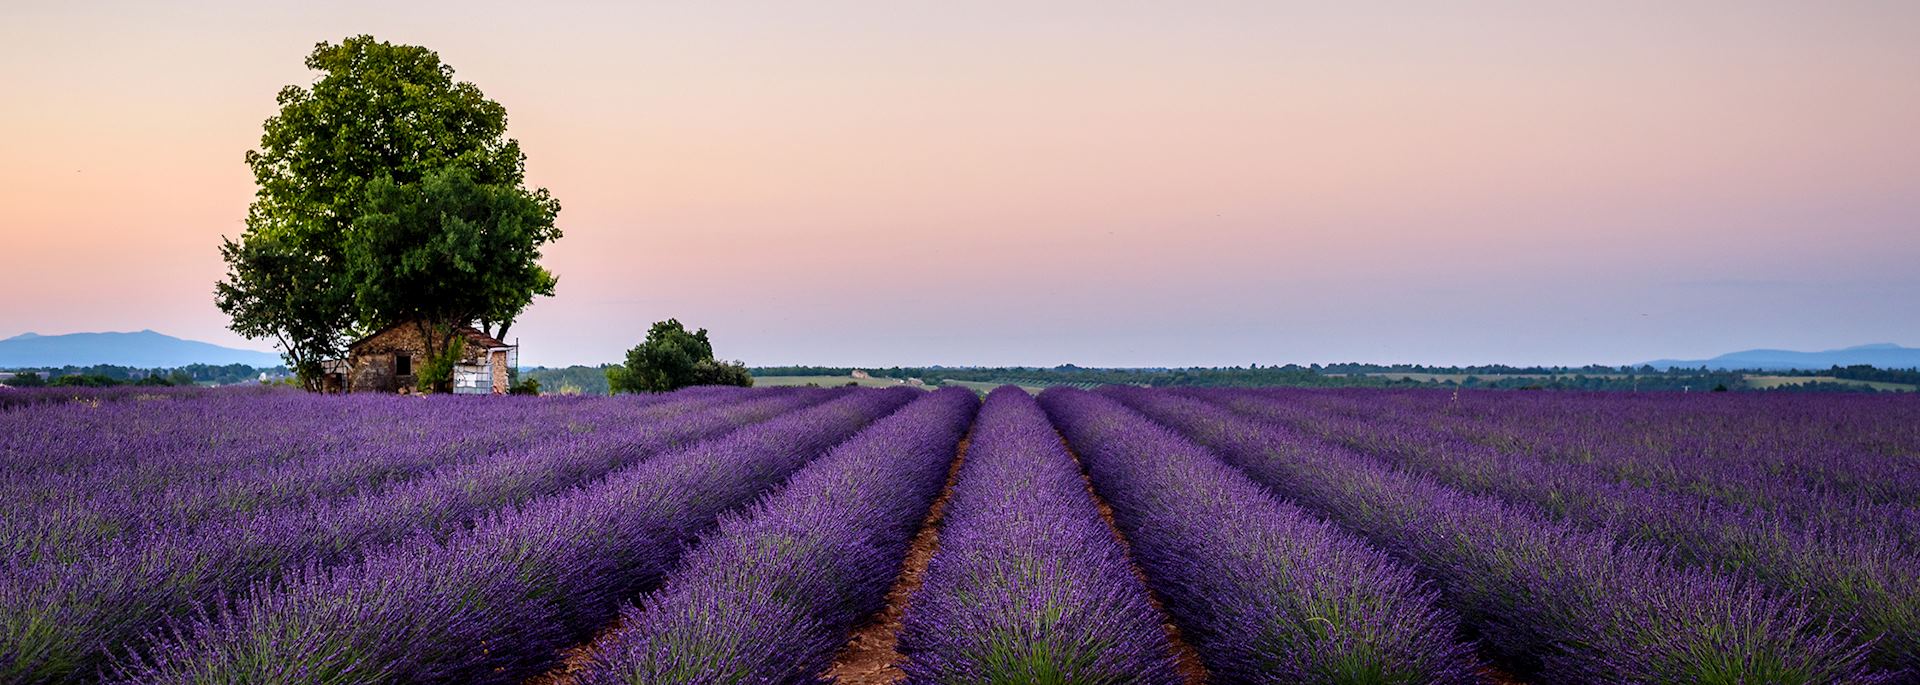 House in field of lavendar, Provence